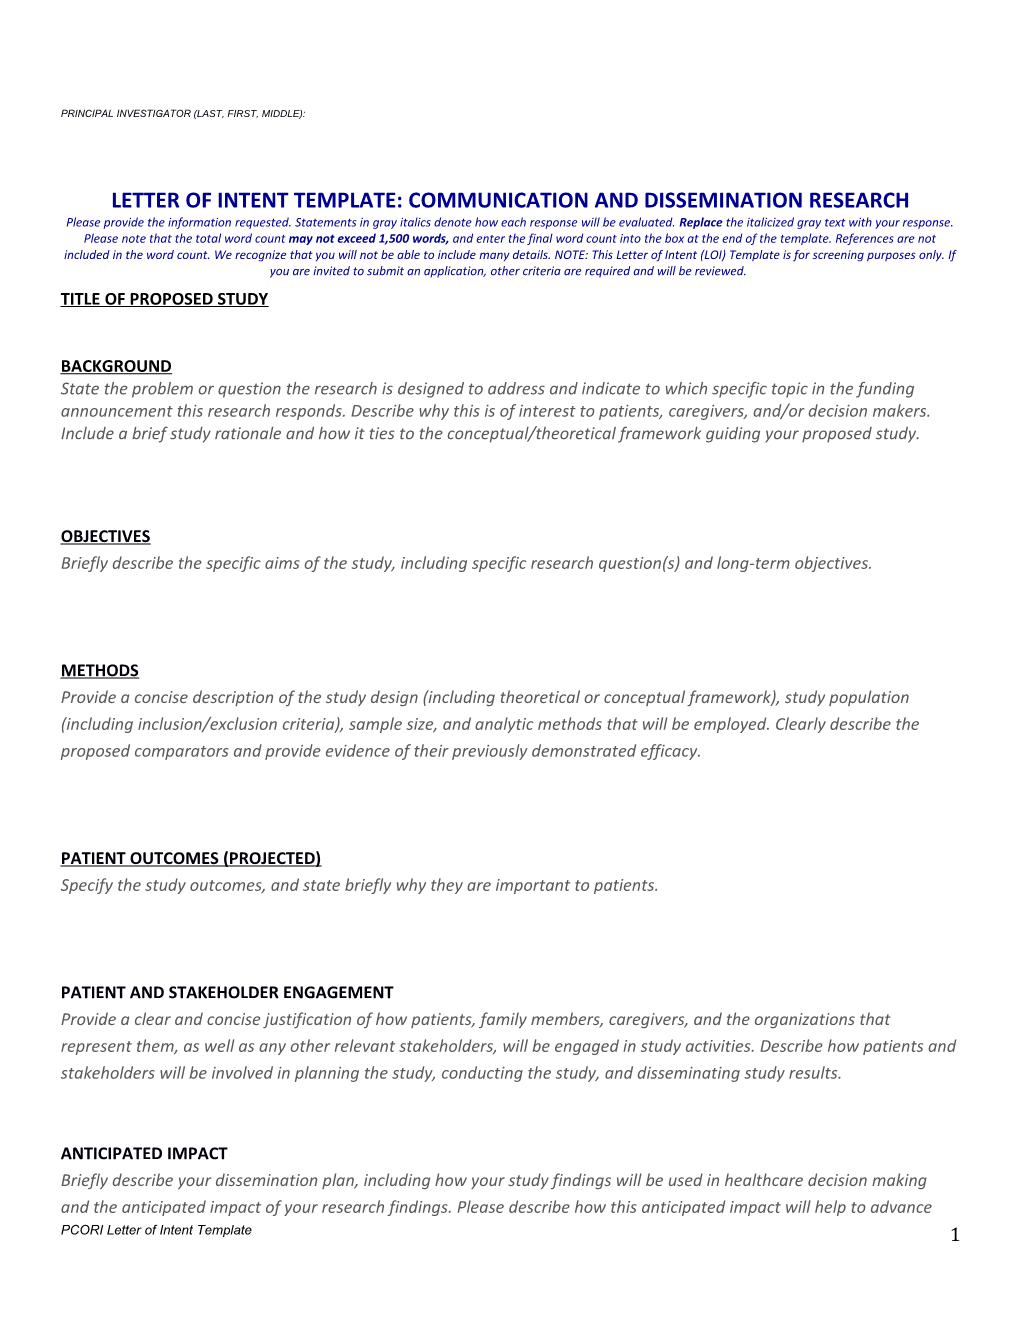 Letter of Intent Template: Communicationanddissemination Research